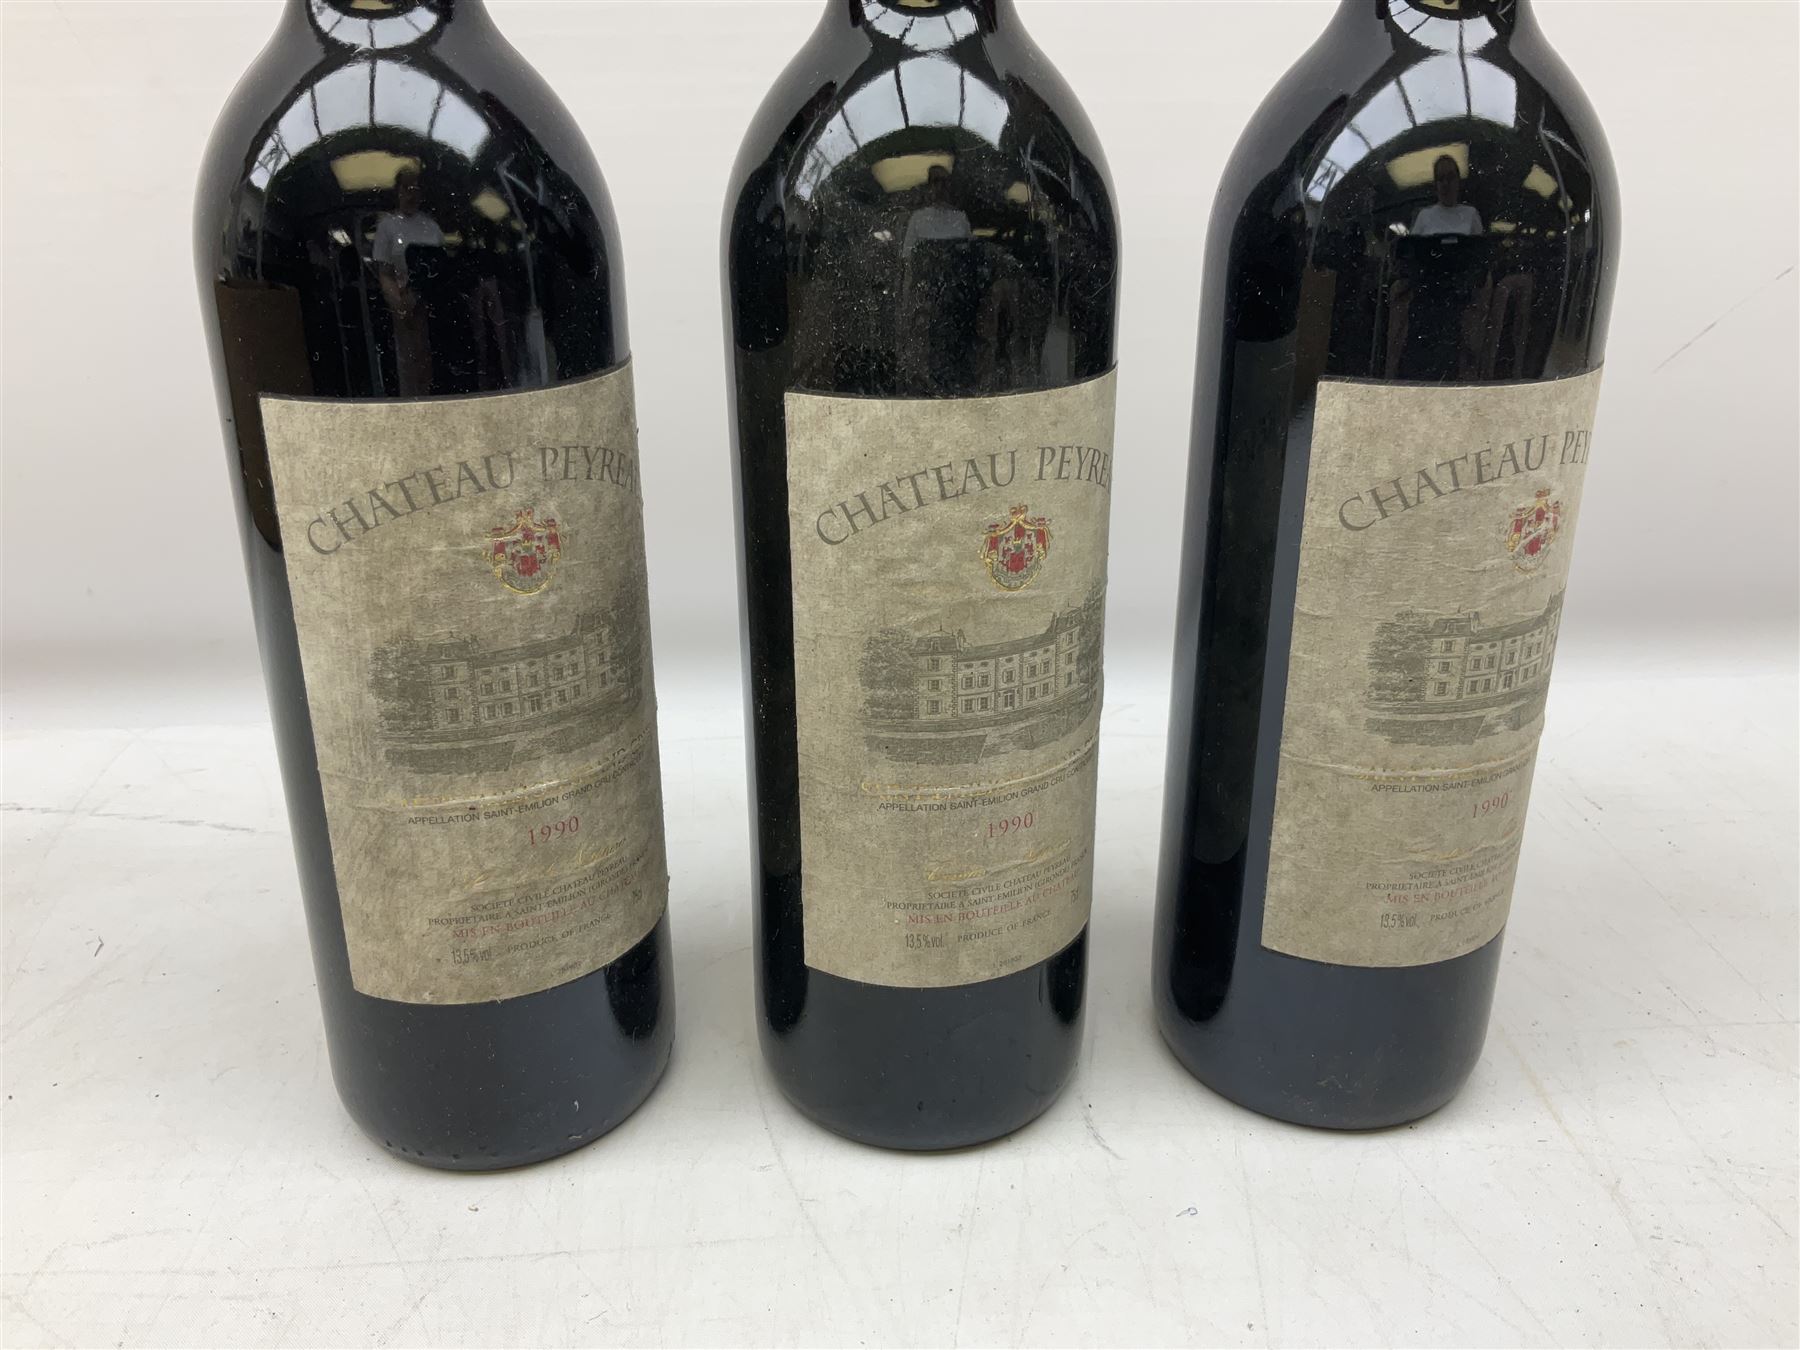 Sold at Auction: 7 Bottles of various red wines, Bordeaux: 2x 1995